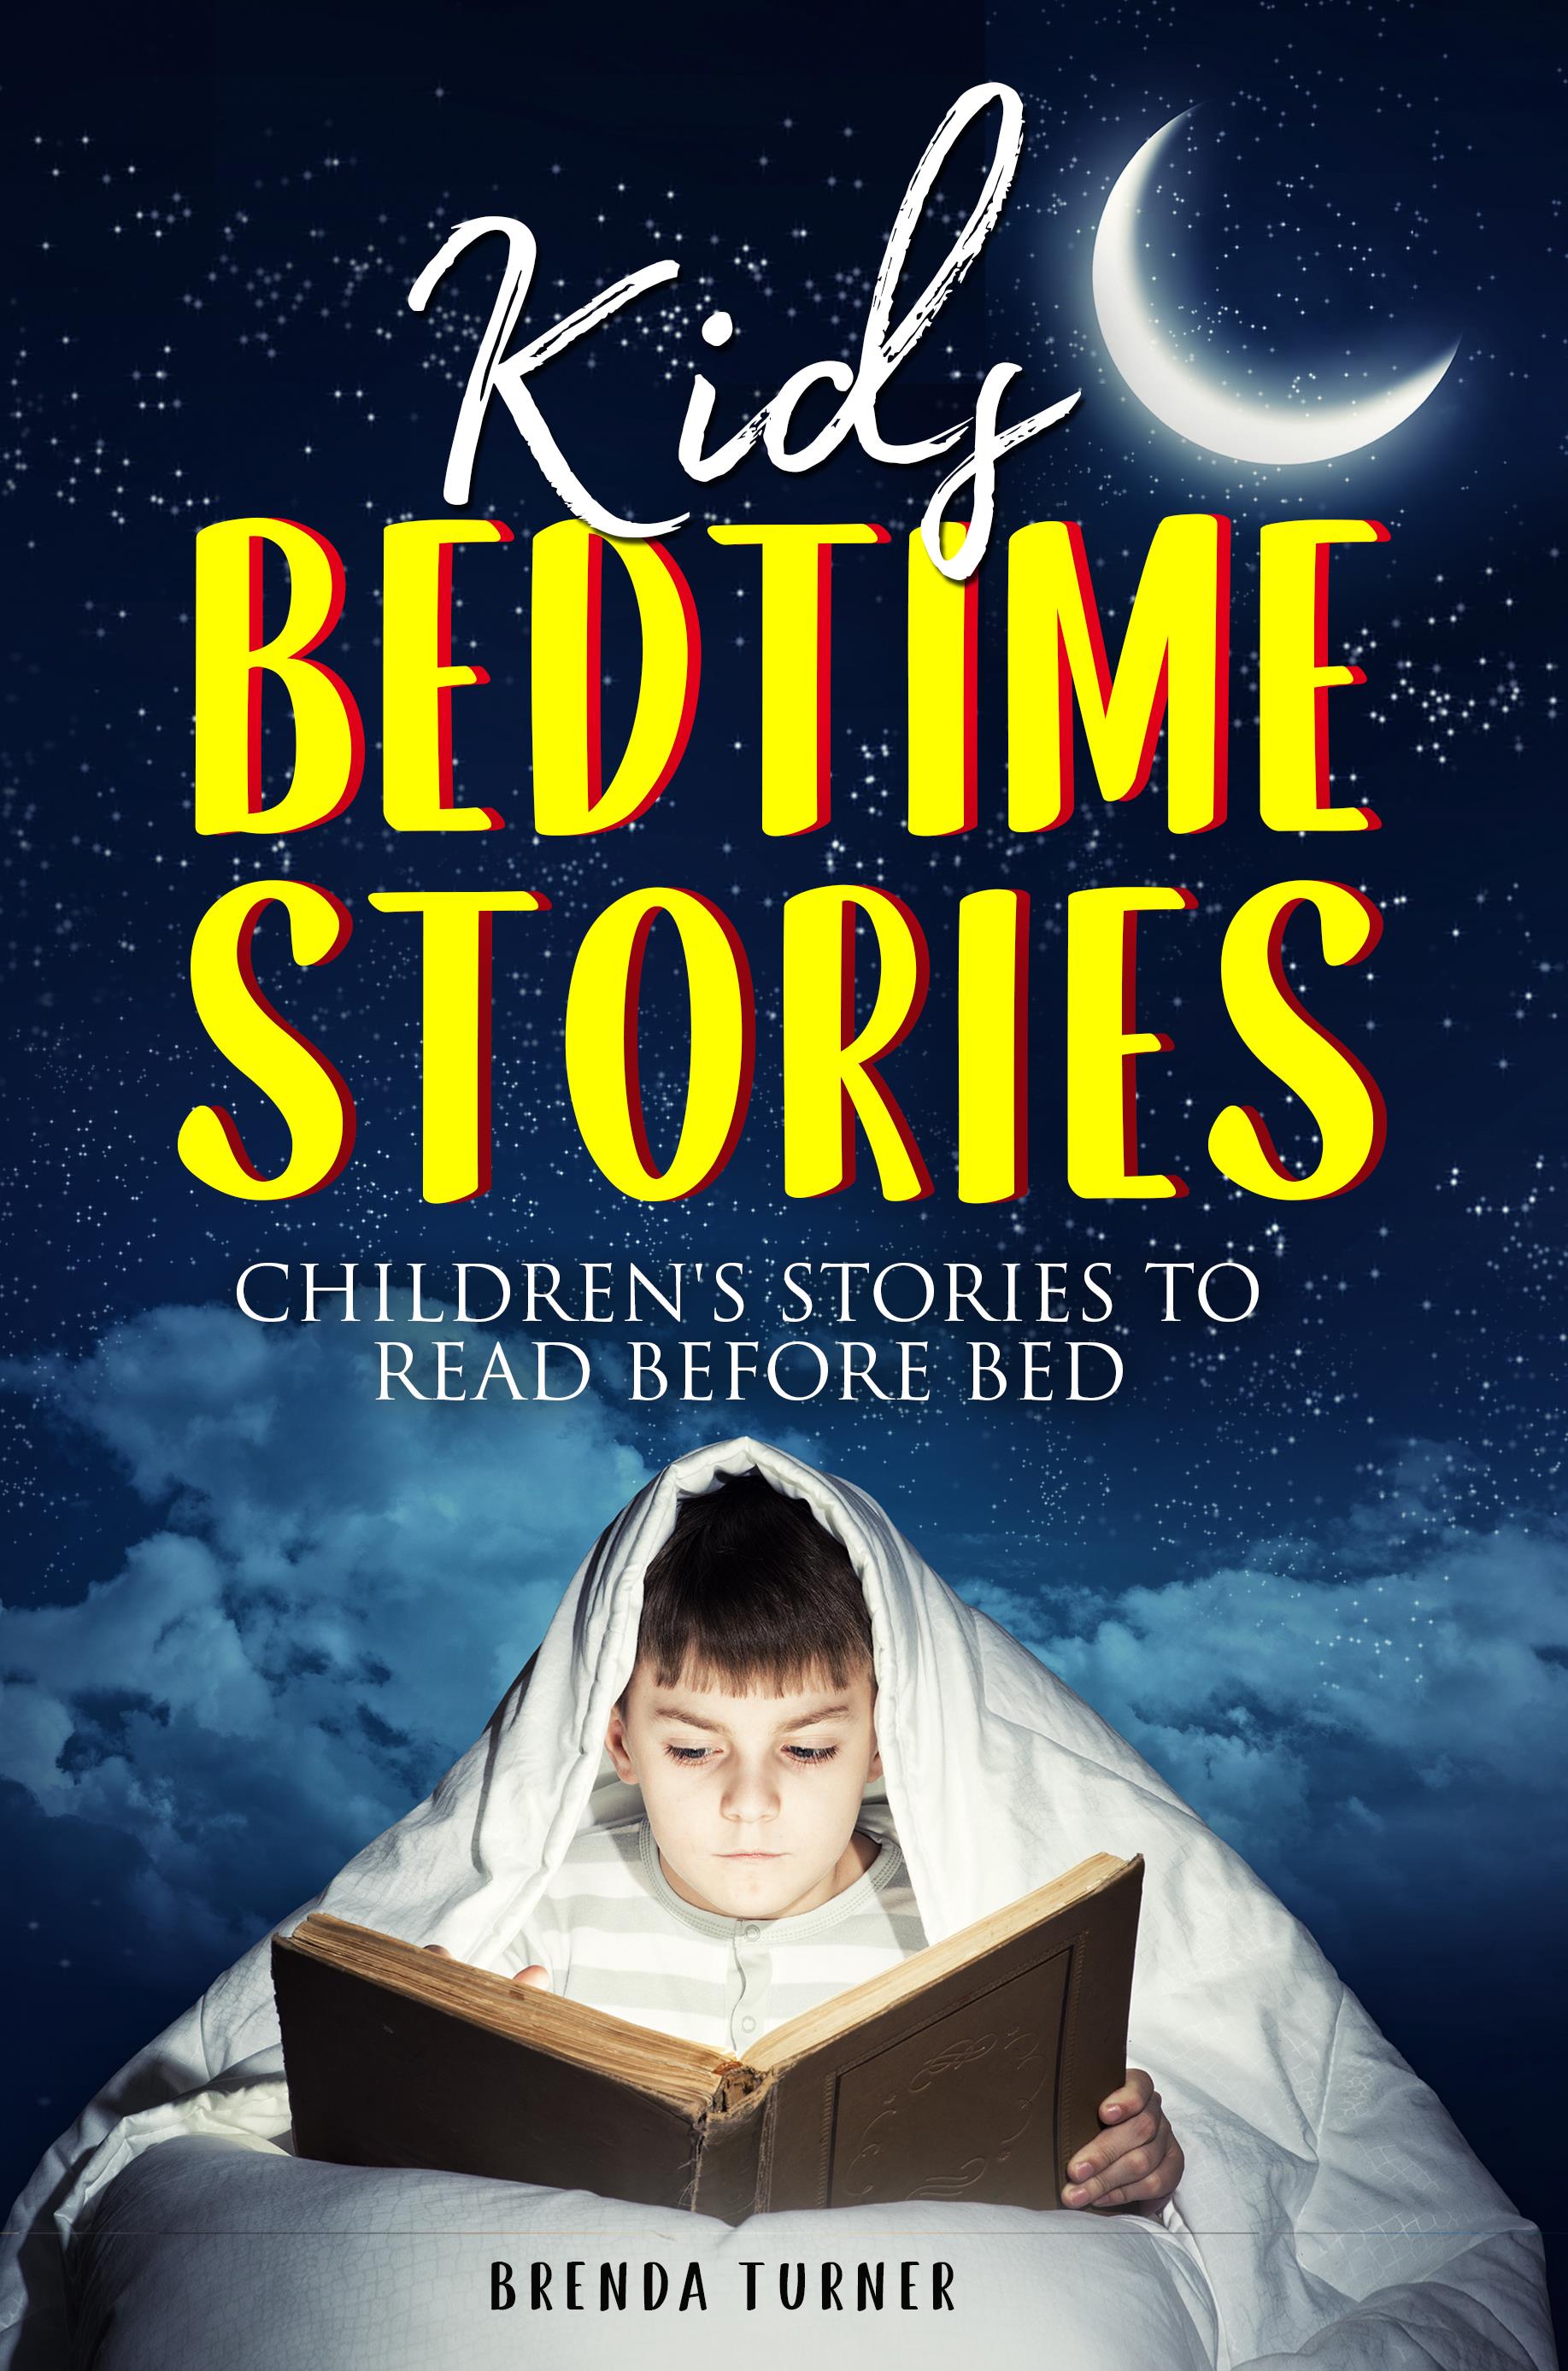 Kids Bedtime Stories. Children's Stories to Read Before Bed